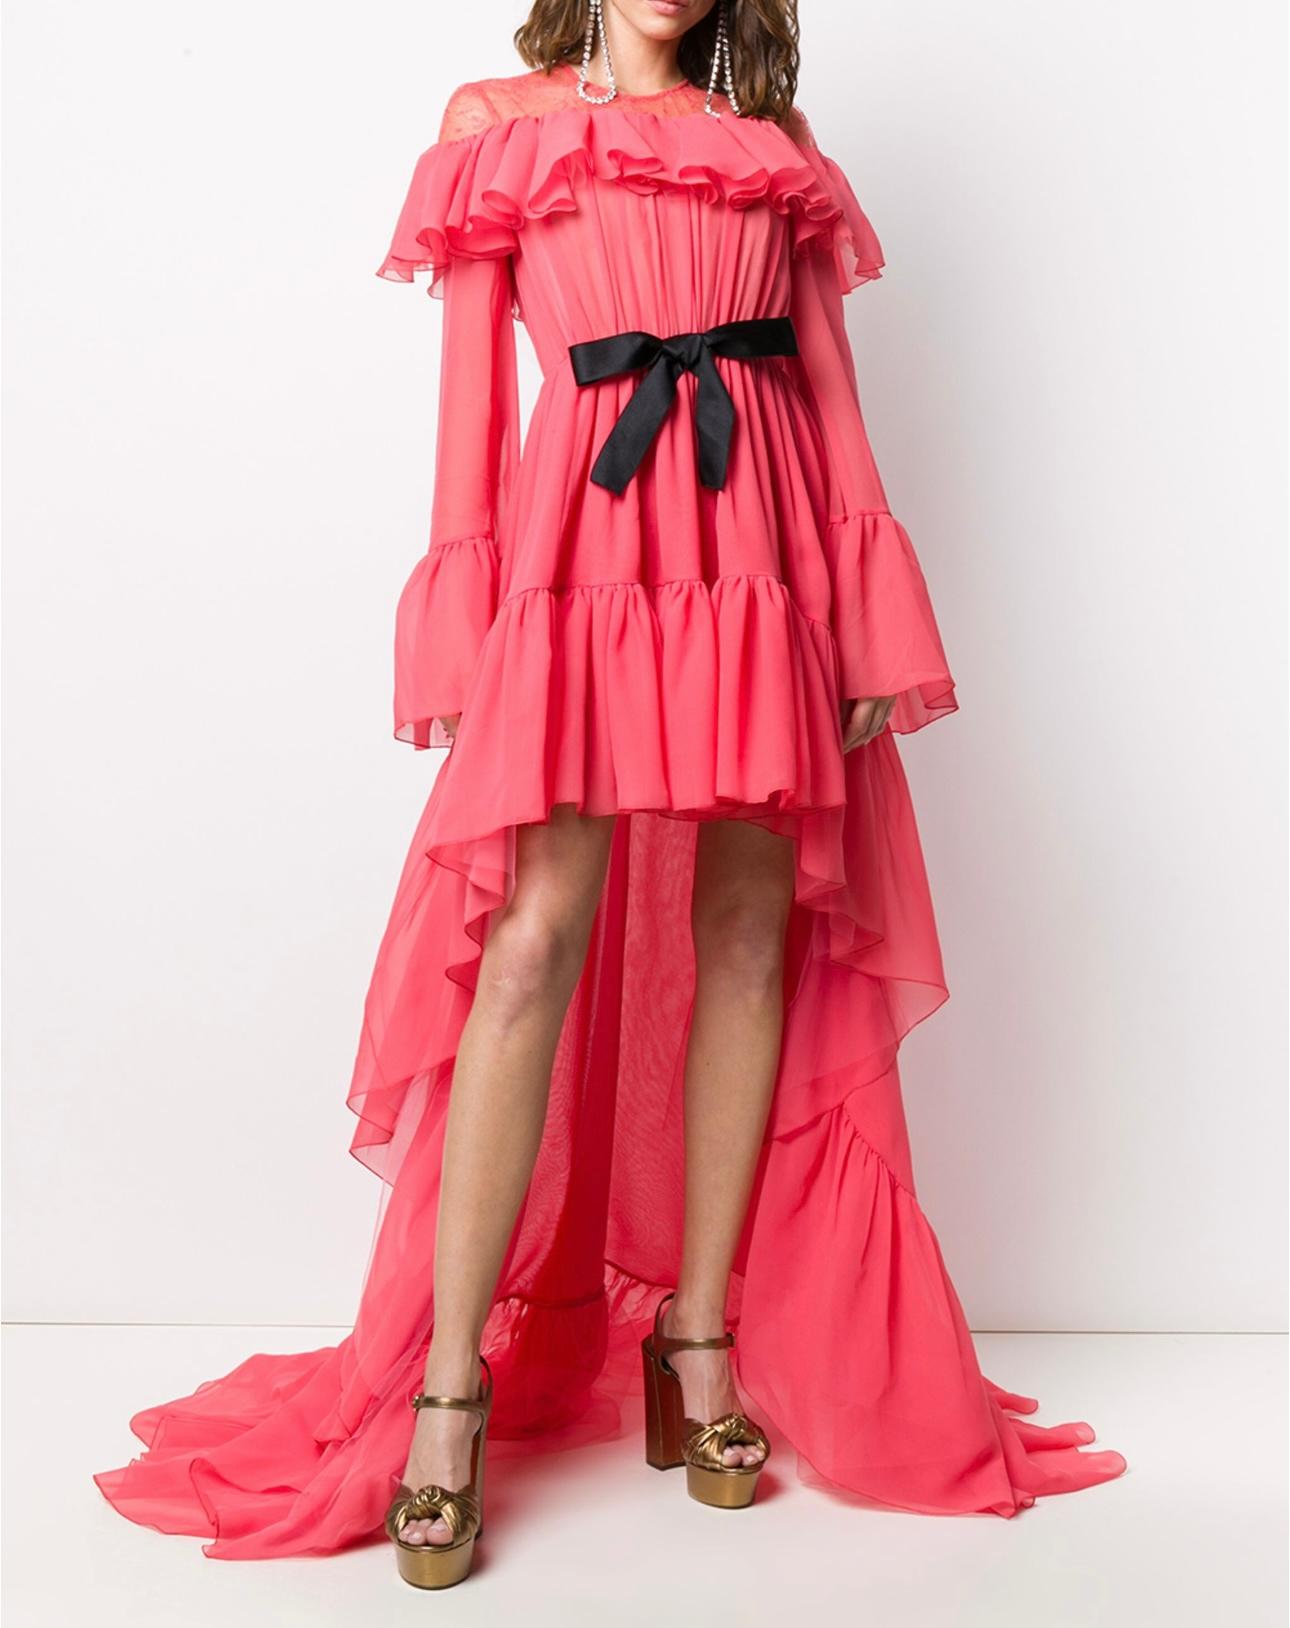 Giambattista Valli Hot Pink Silk Ruffled Gown with Lace Shoulders and Black Bow For Sale 4